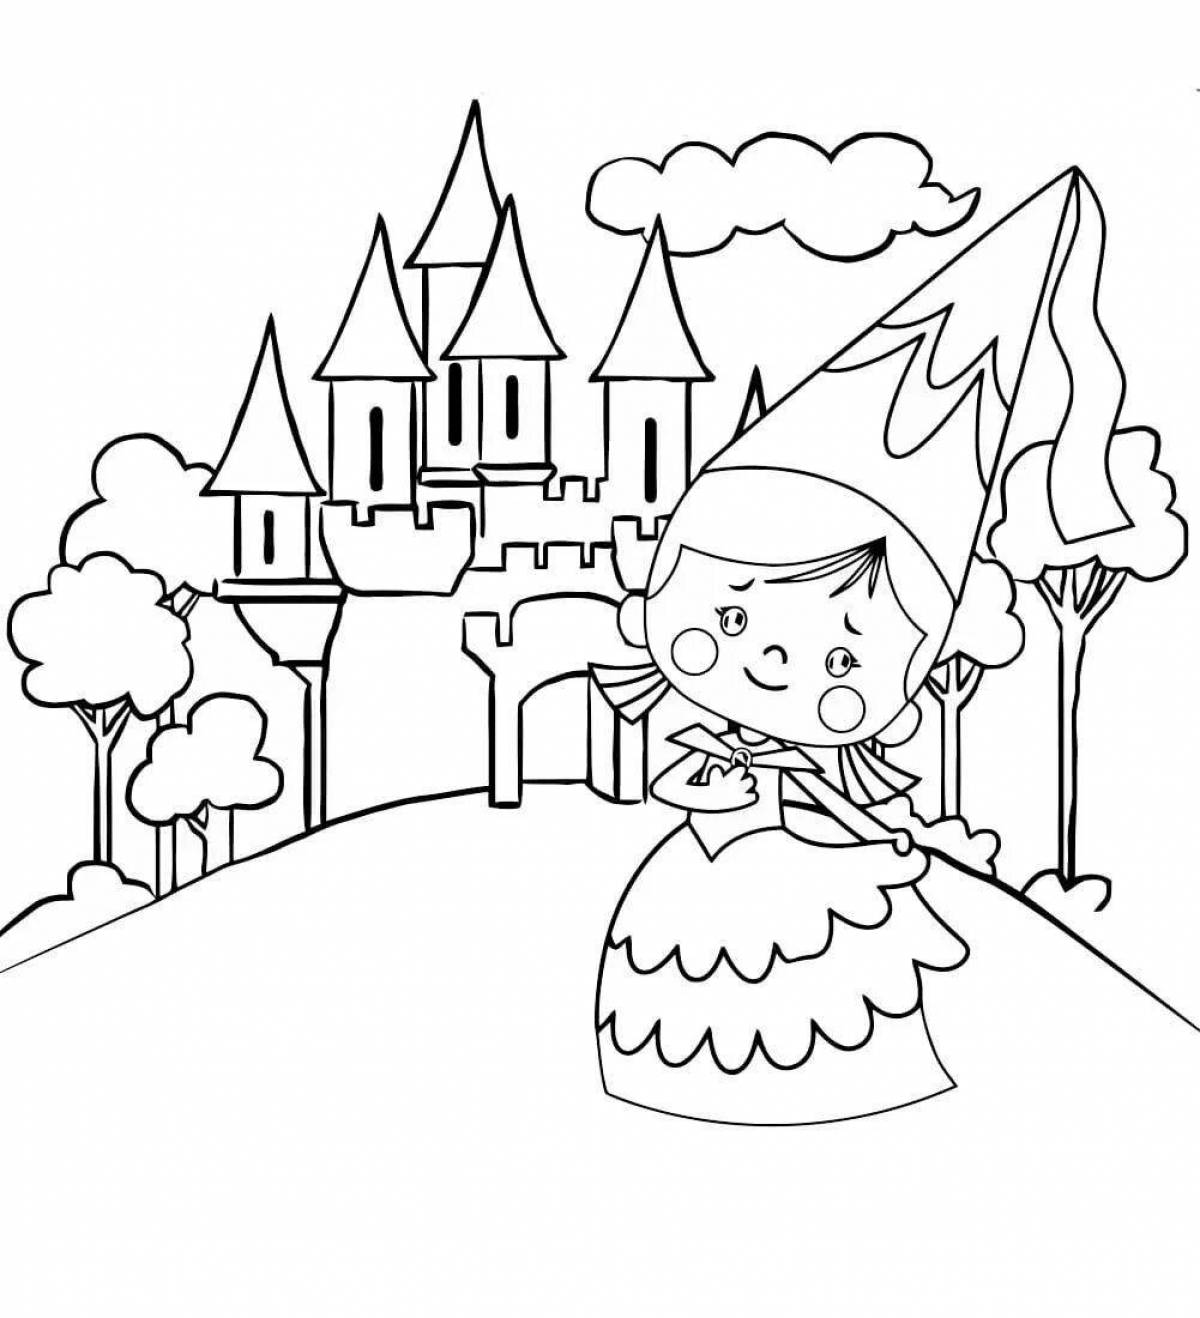 Exquisite coloring book for girls princess castle